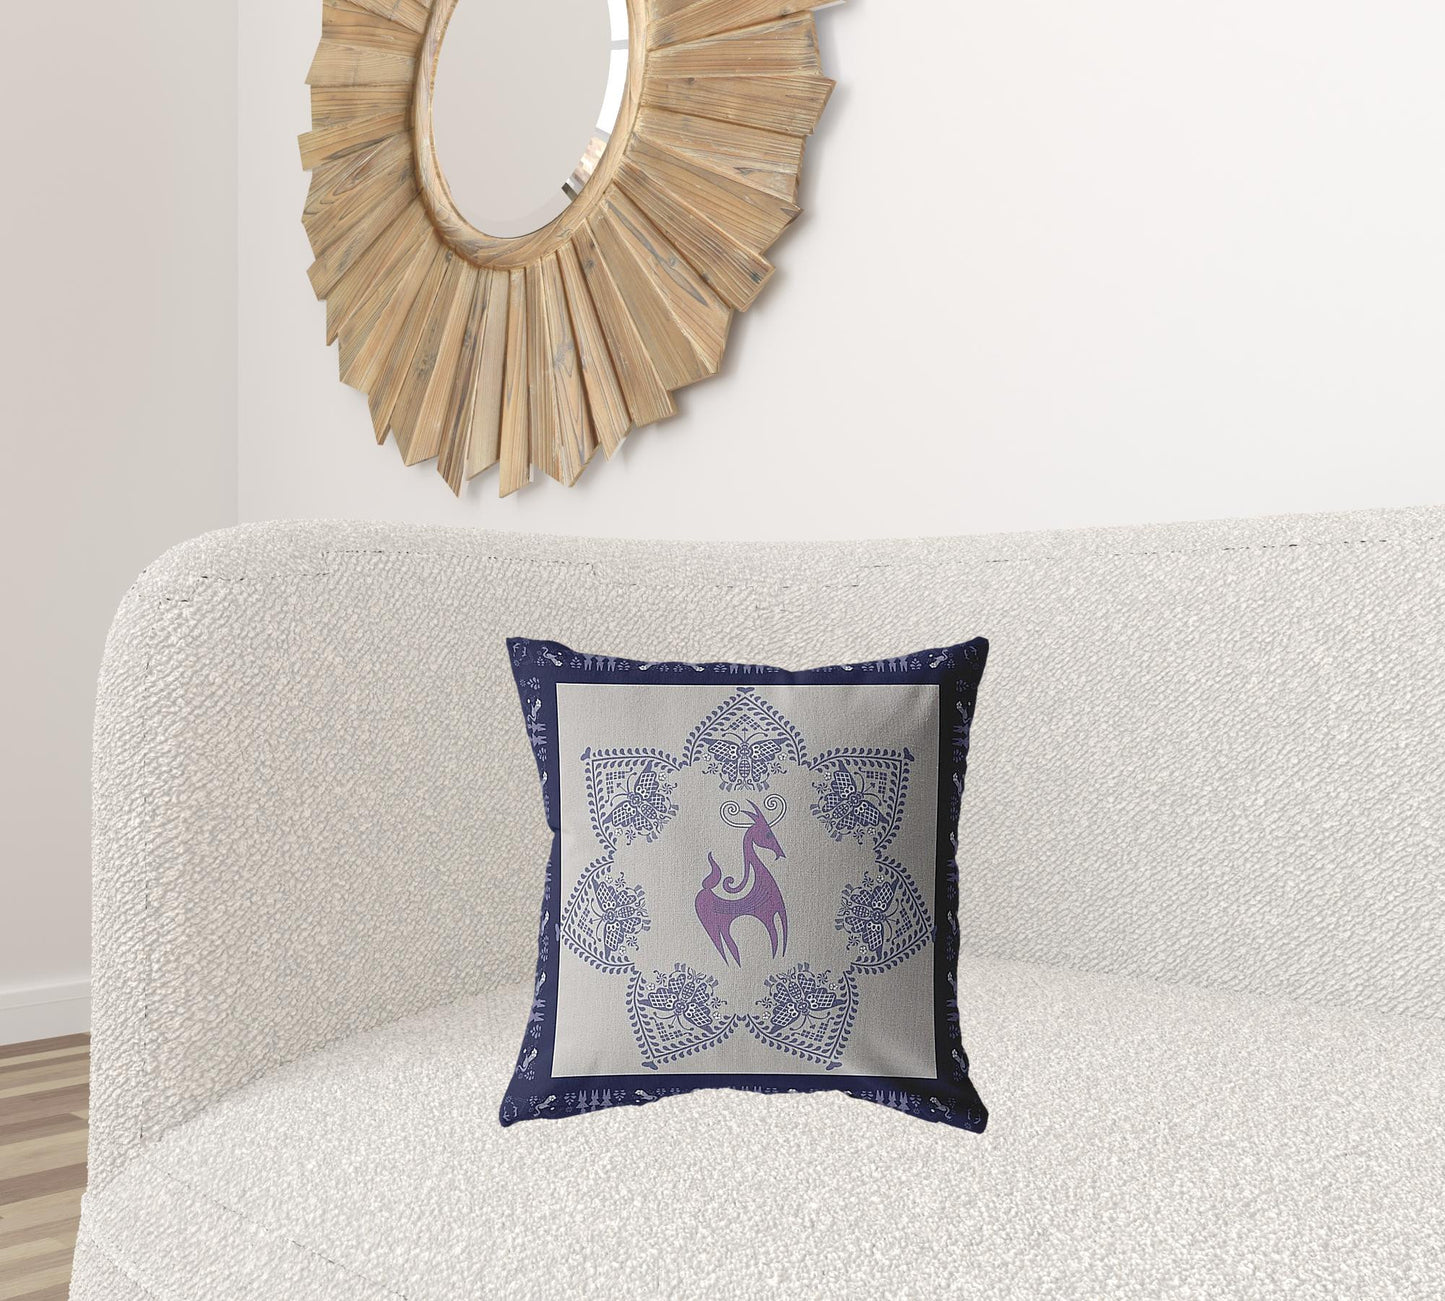 18” Gray Purple Horse Zippered Suede Throw Pillow